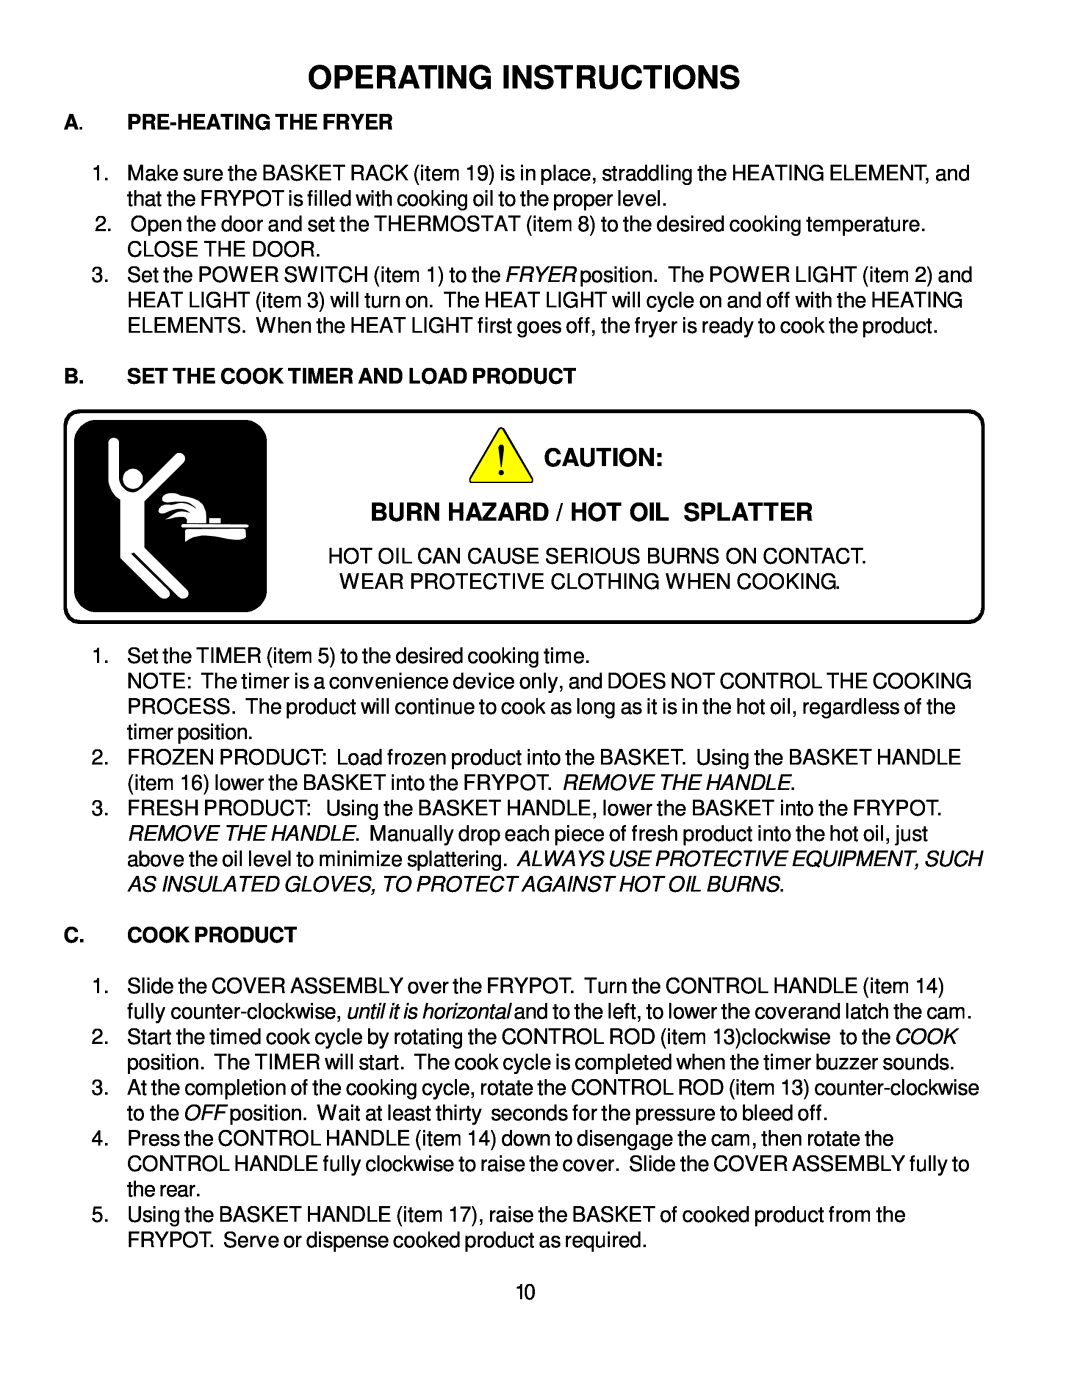 Bloomfield WFPE-30F Operating Instructions, Burn Hazard / Hot Oil Splatter, A. Pre-Heating The Fryer, C. Cook Product 